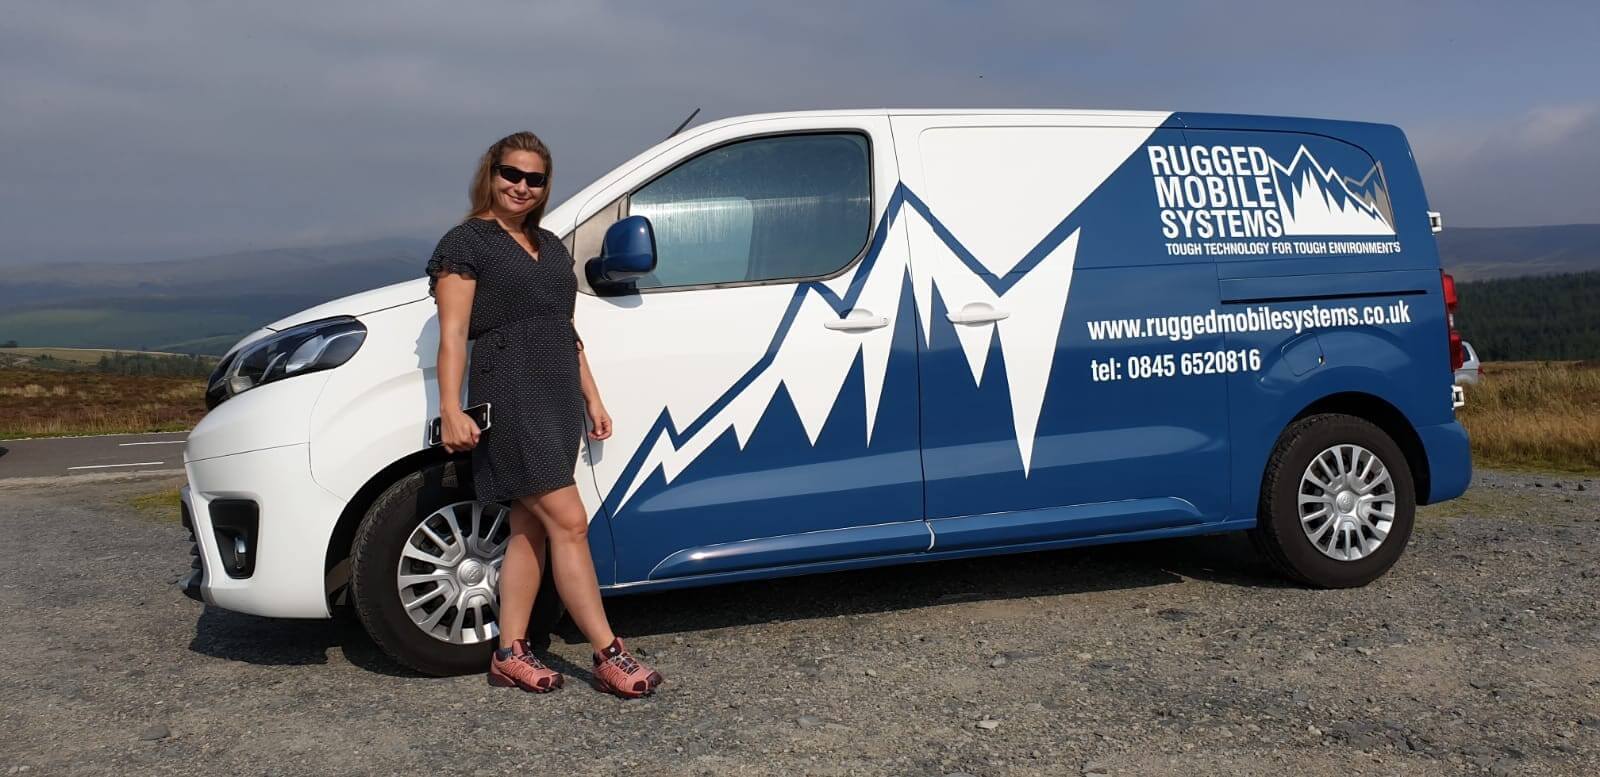 Have you spotted RUGGED MOBILE Systems van yet?